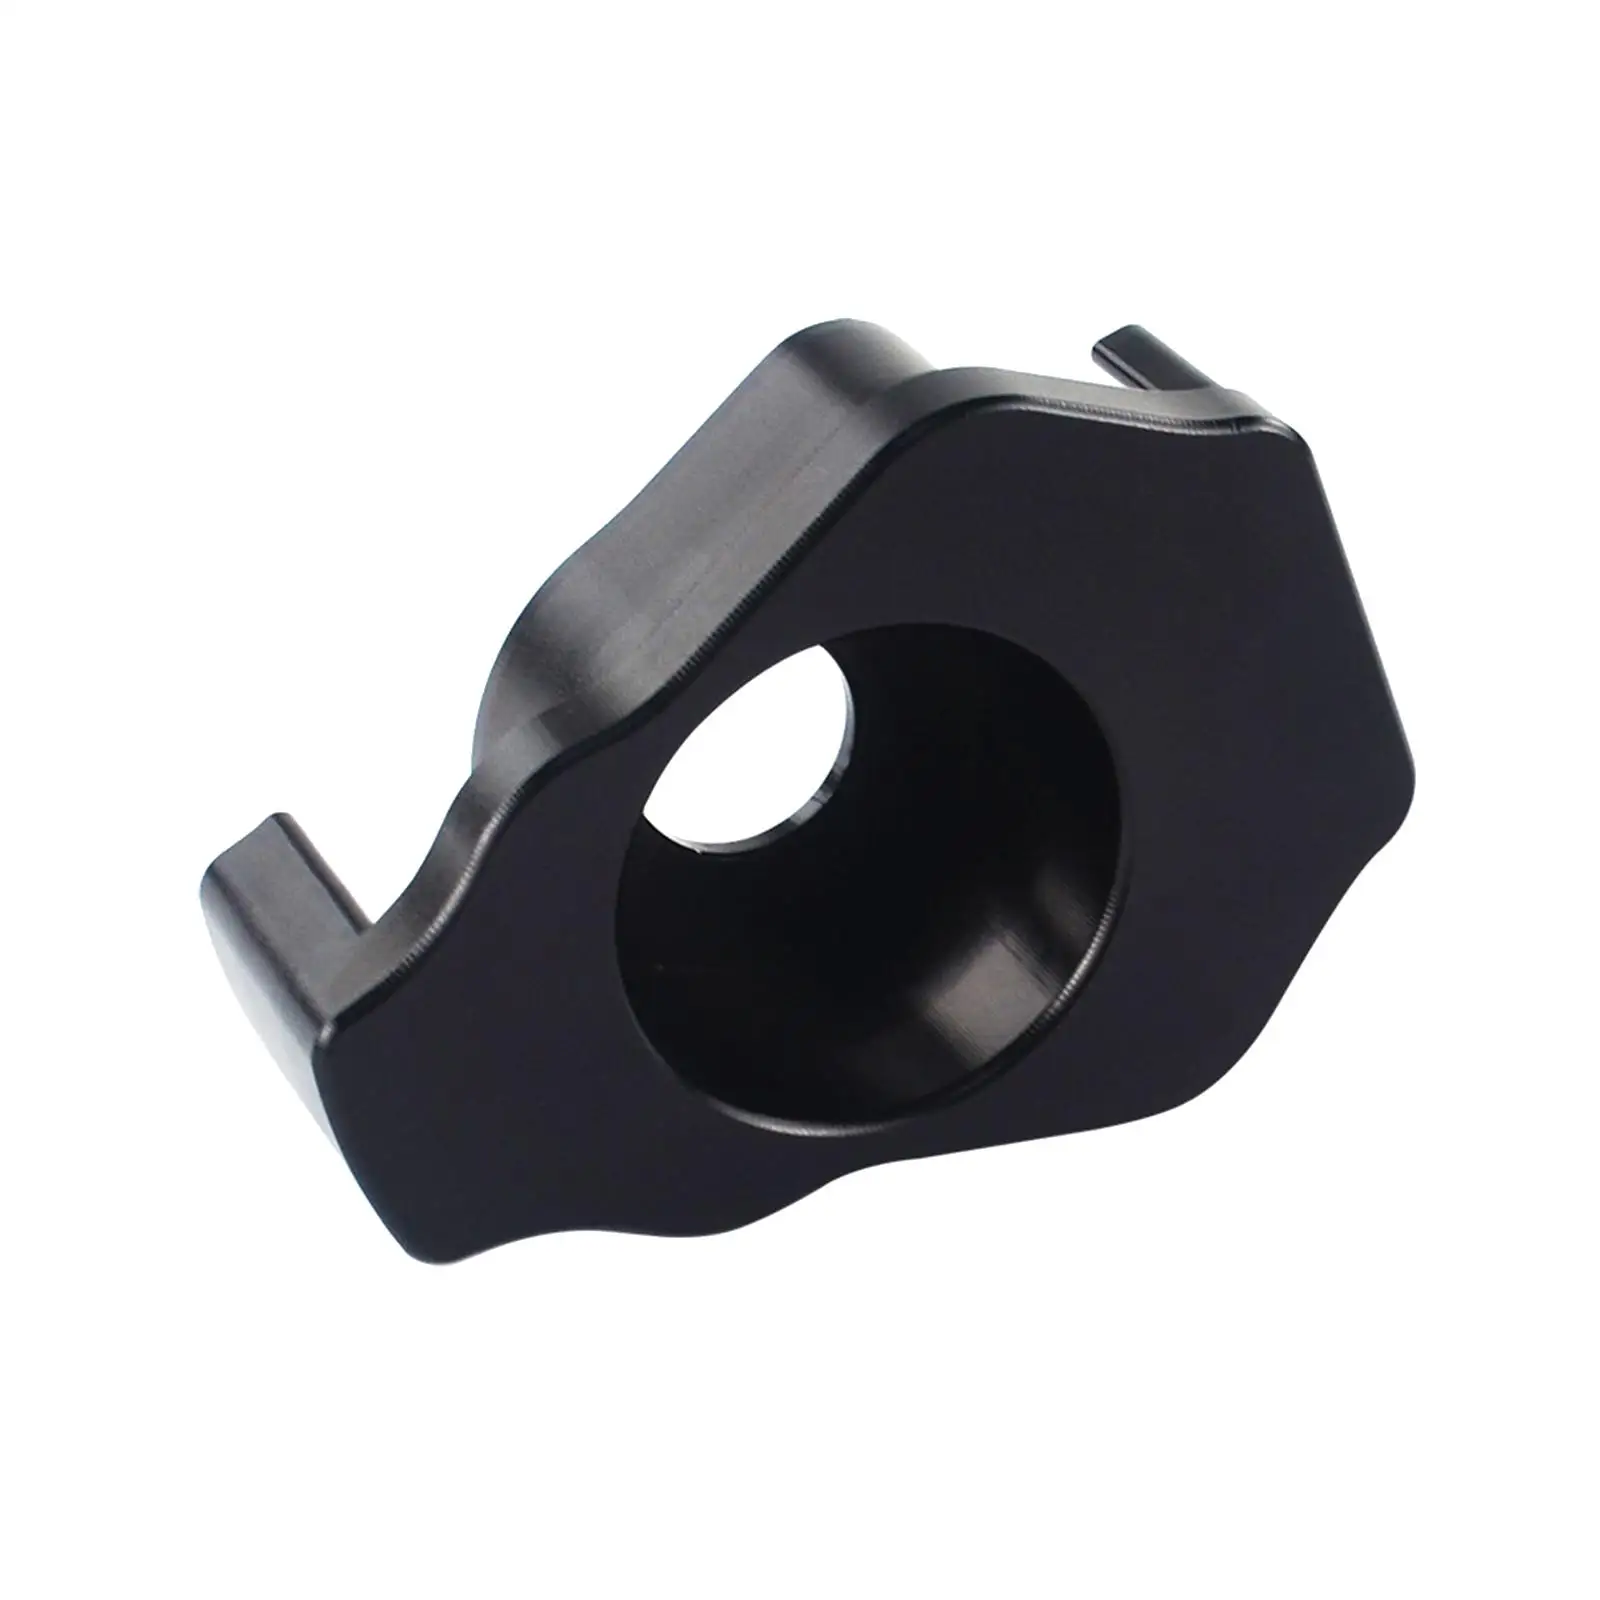   Mount Insert Replacement Fits  Golf   14-18 Improves Shifting